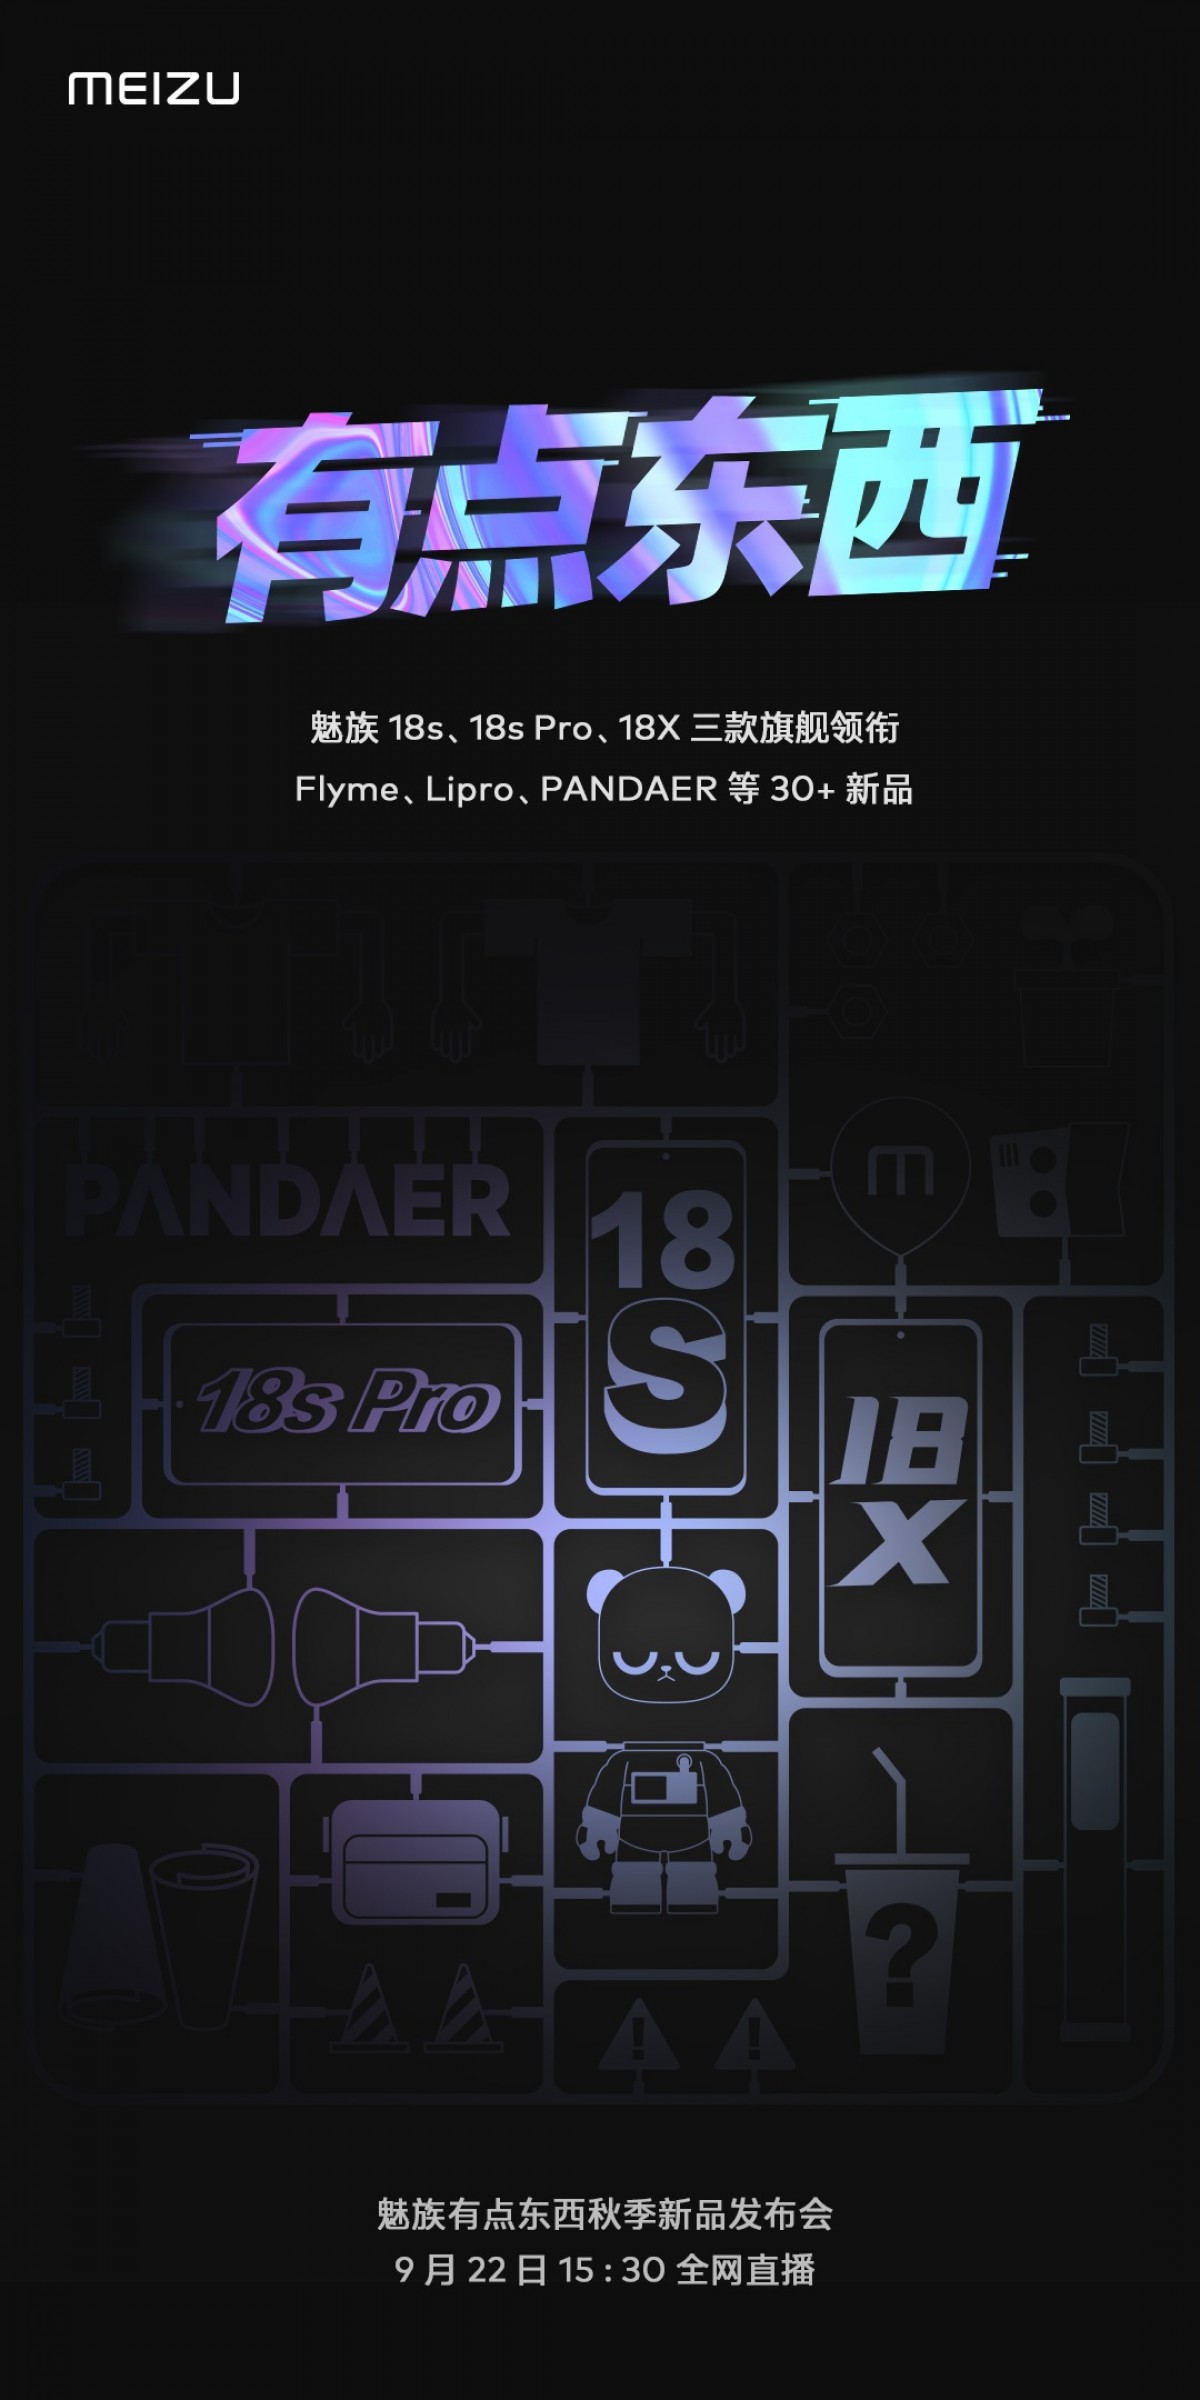 Meizu 18s, 18s Pro to arrive on September 22, Meizu 18x to join them